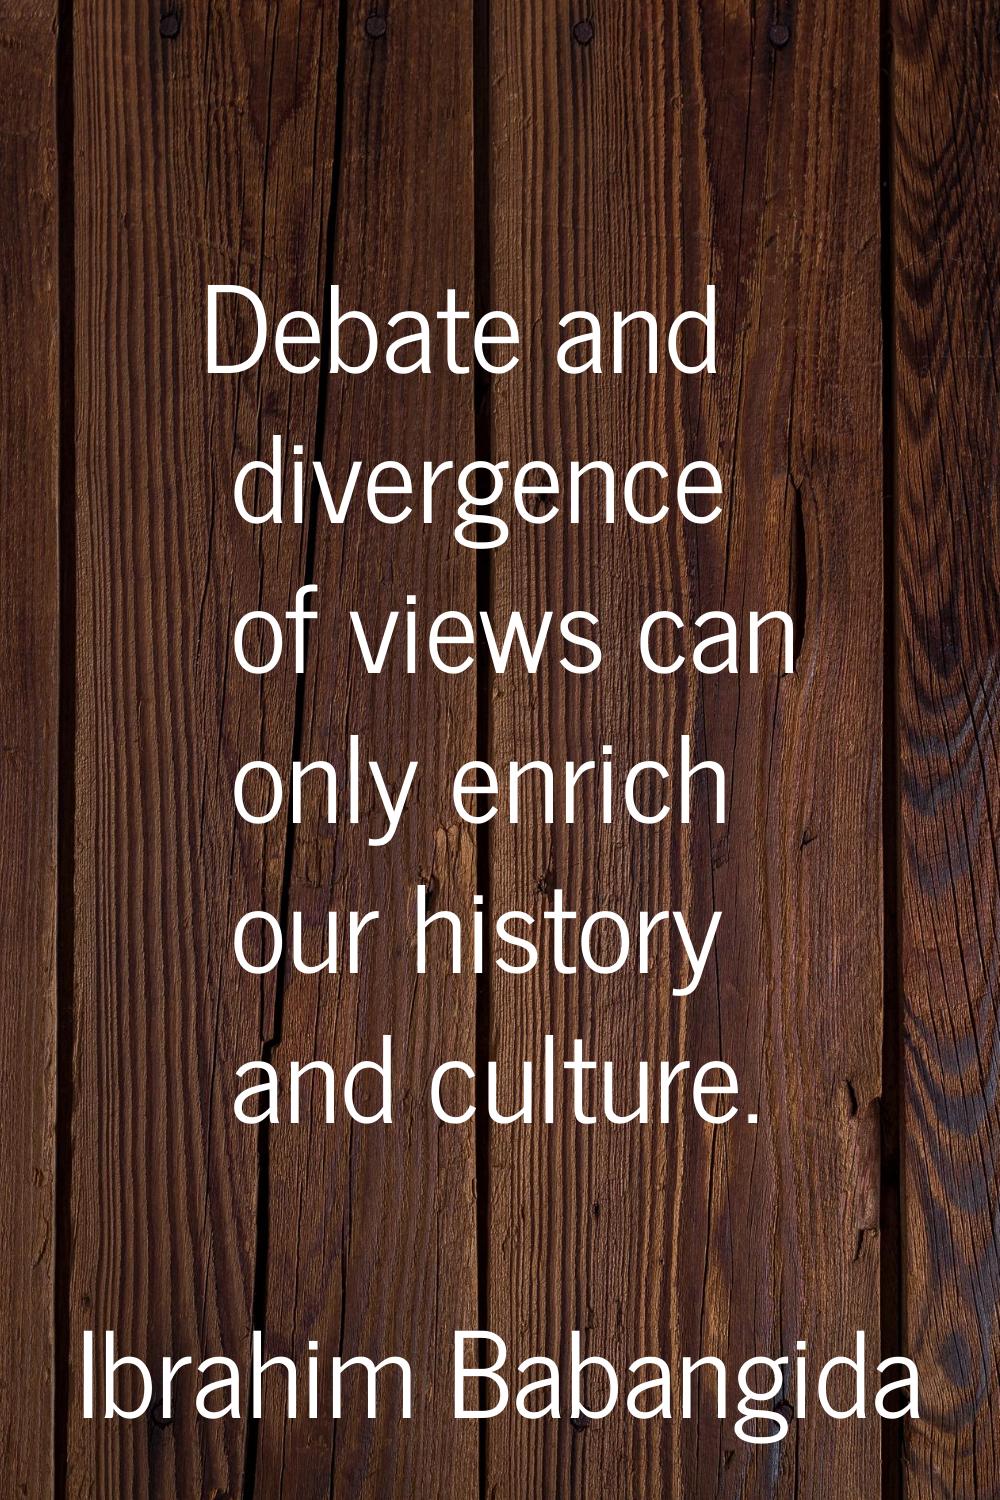 Debate and divergence of views can only enrich our history and culture.